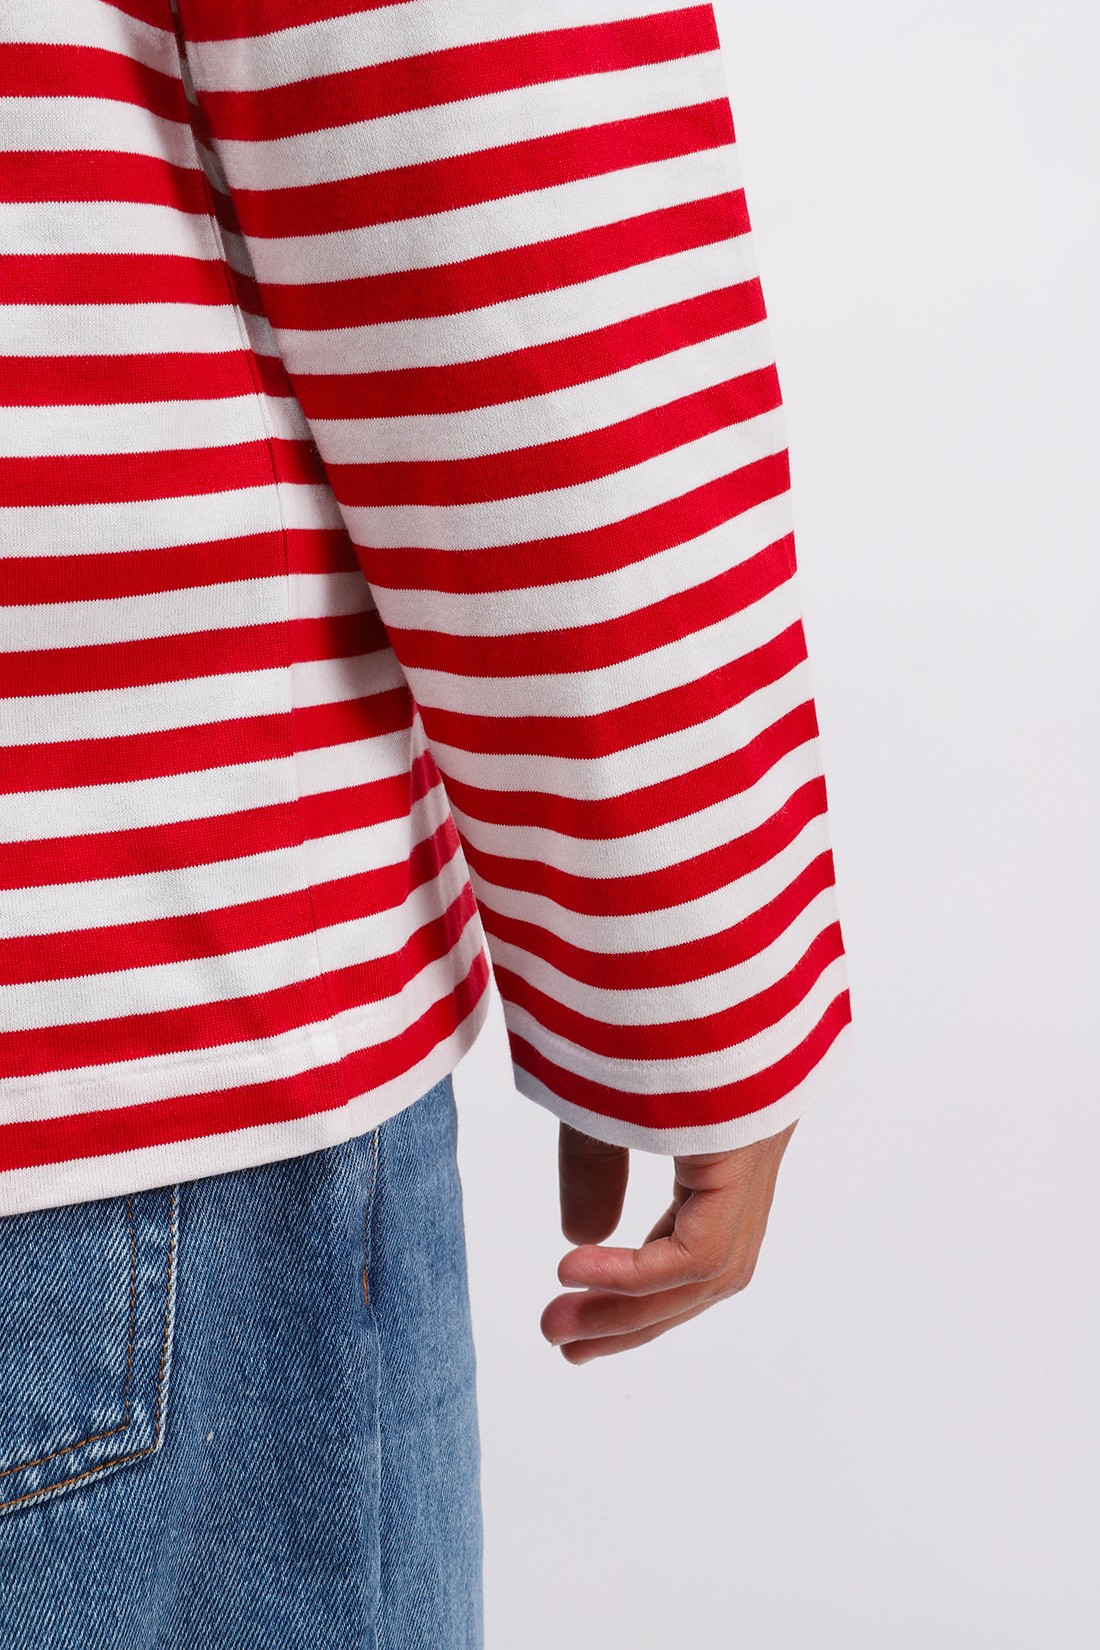 COMME DES GARÇONS PLAY / Play striped t-shirt Red white